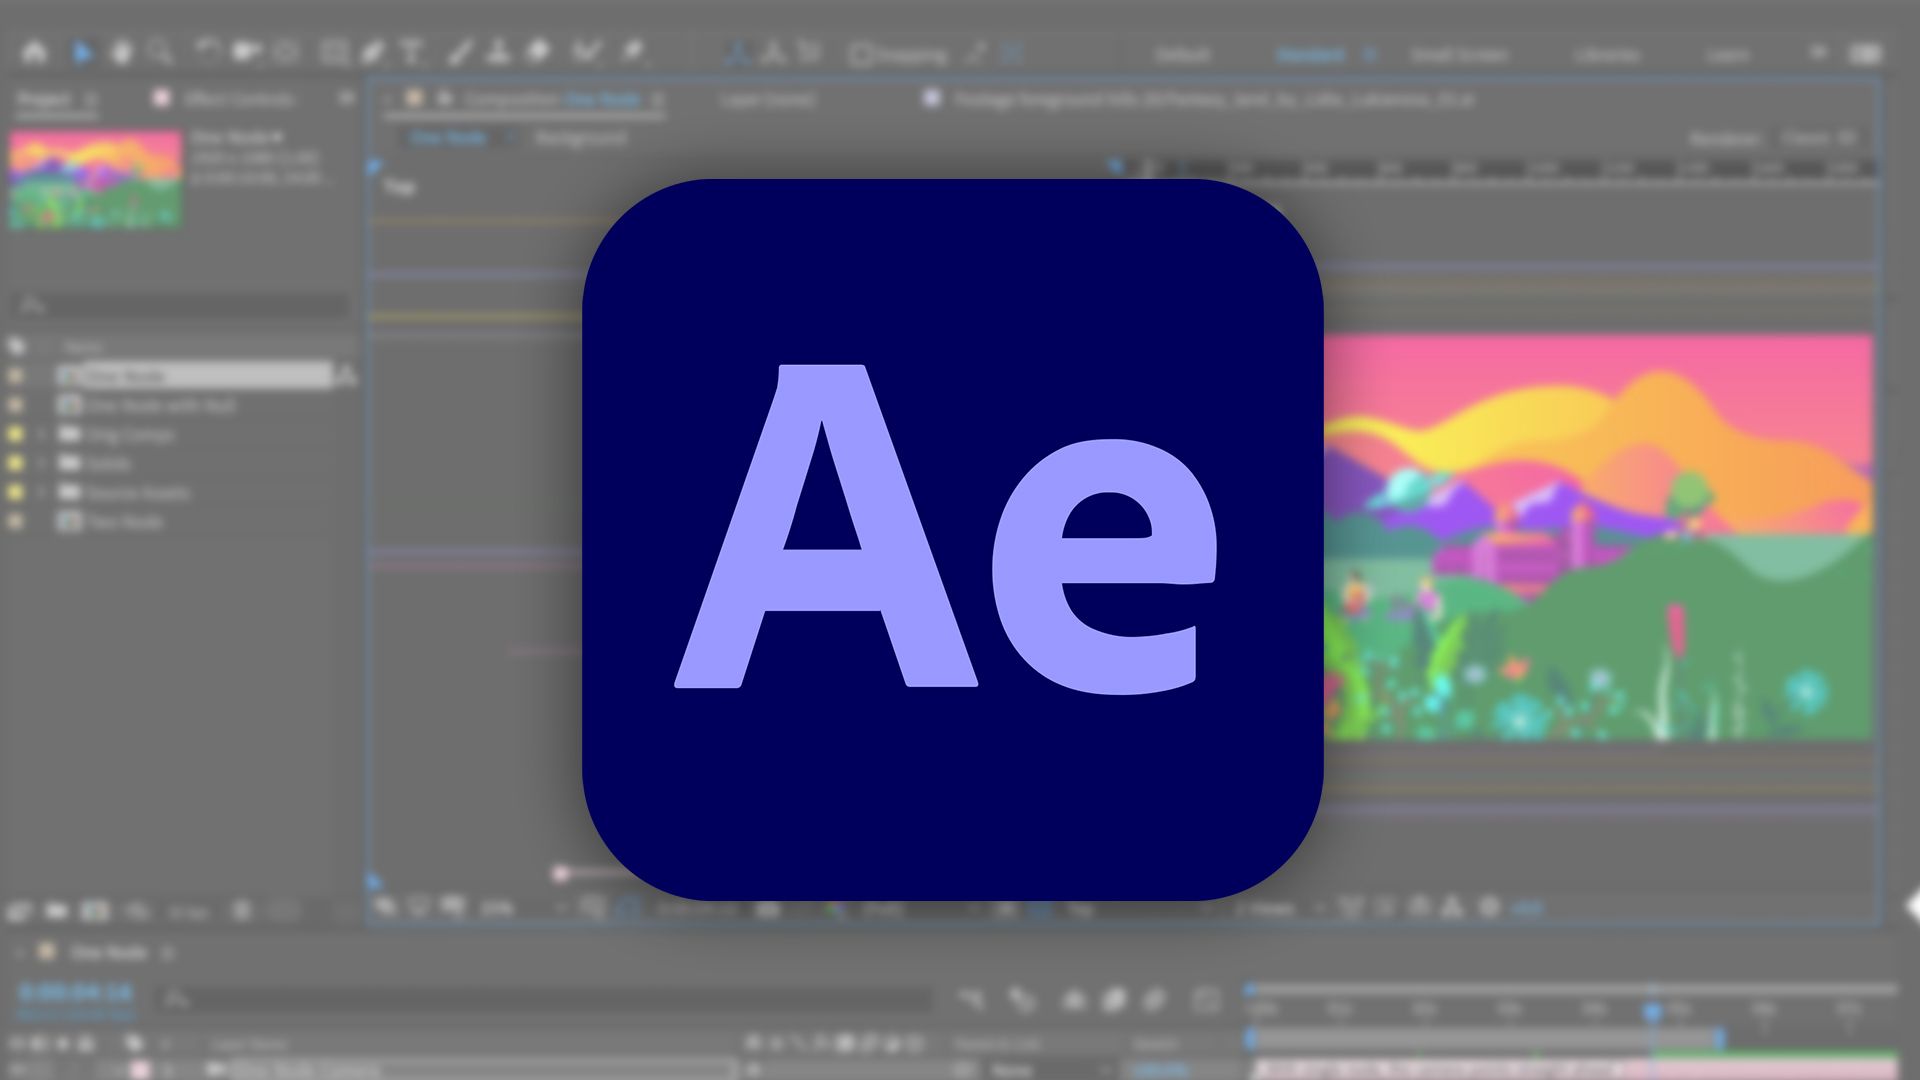 after effects creative cloud download